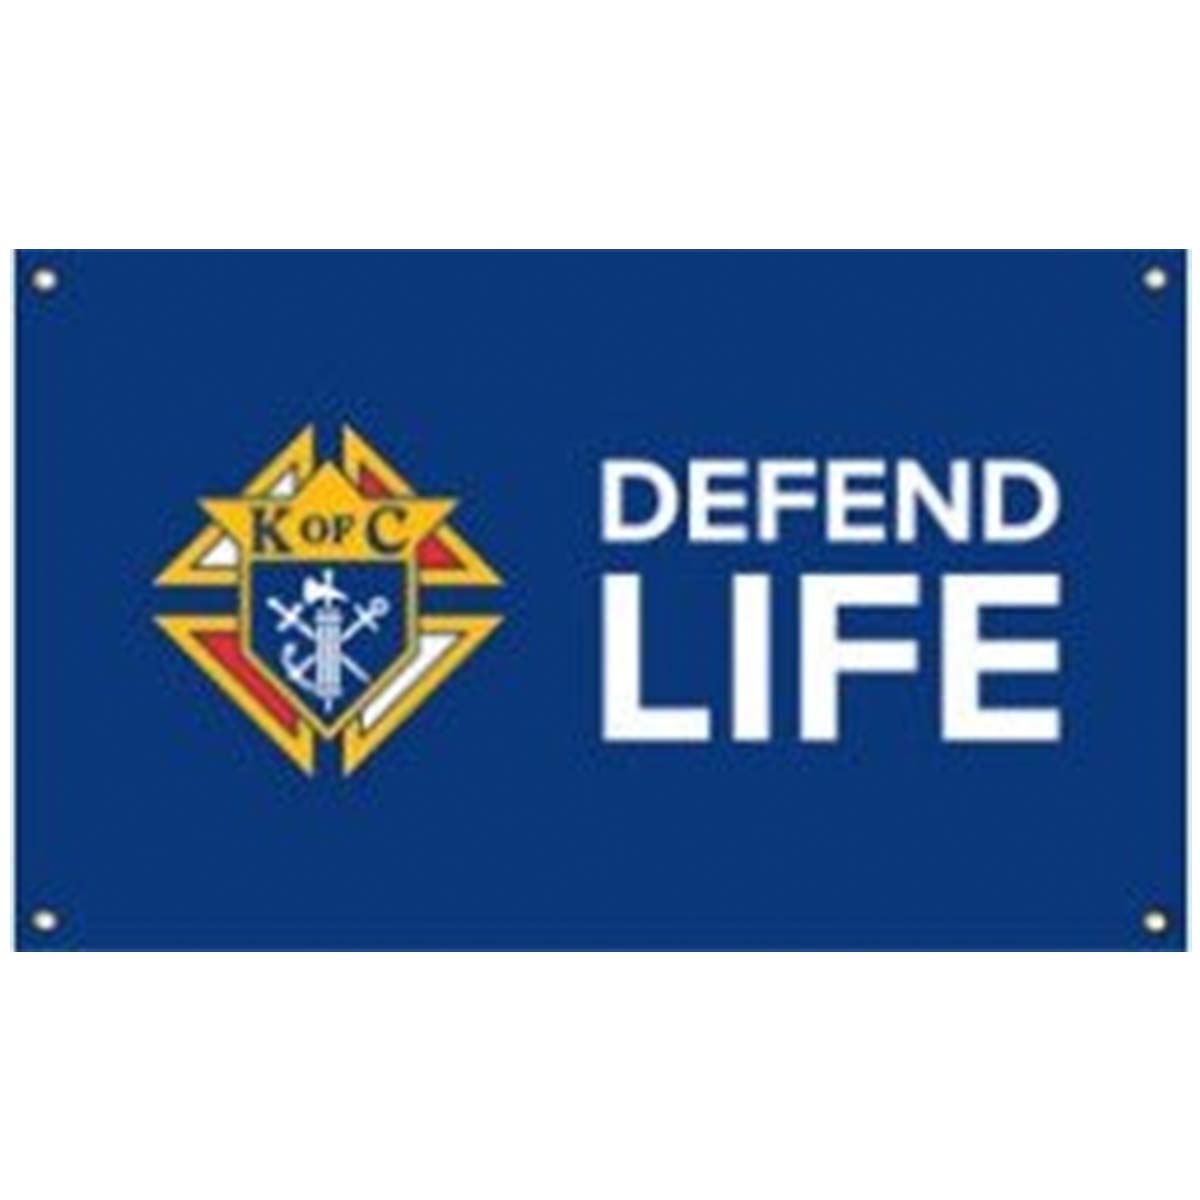 3FT X 6FT Defend Life Vinyl Banner with Grommets